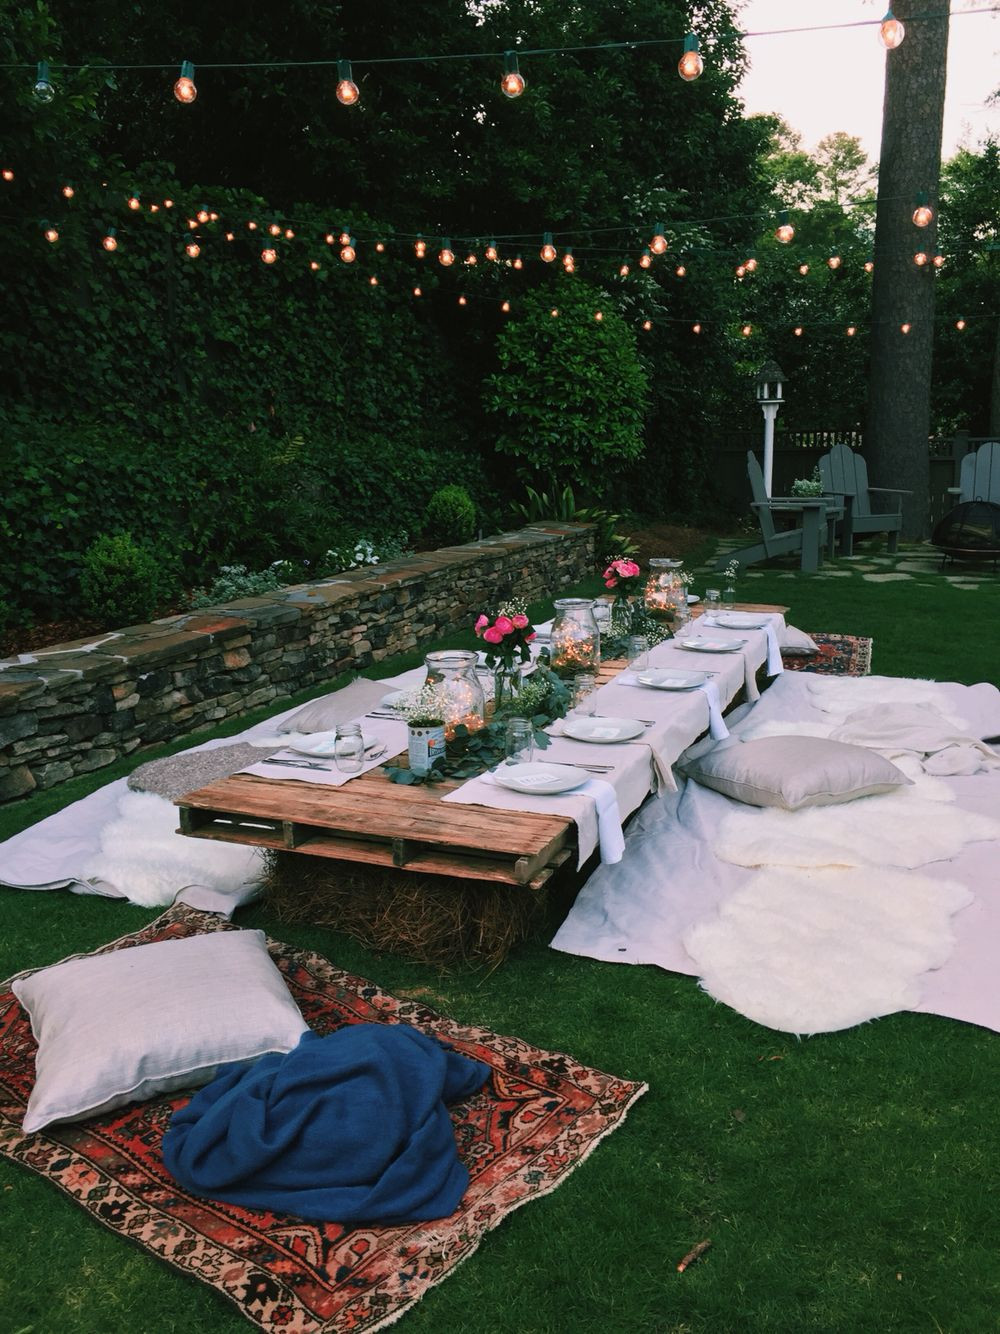 Backyard Picnic Party Ideas
 Pin by Style and Trends on Just Beautiful